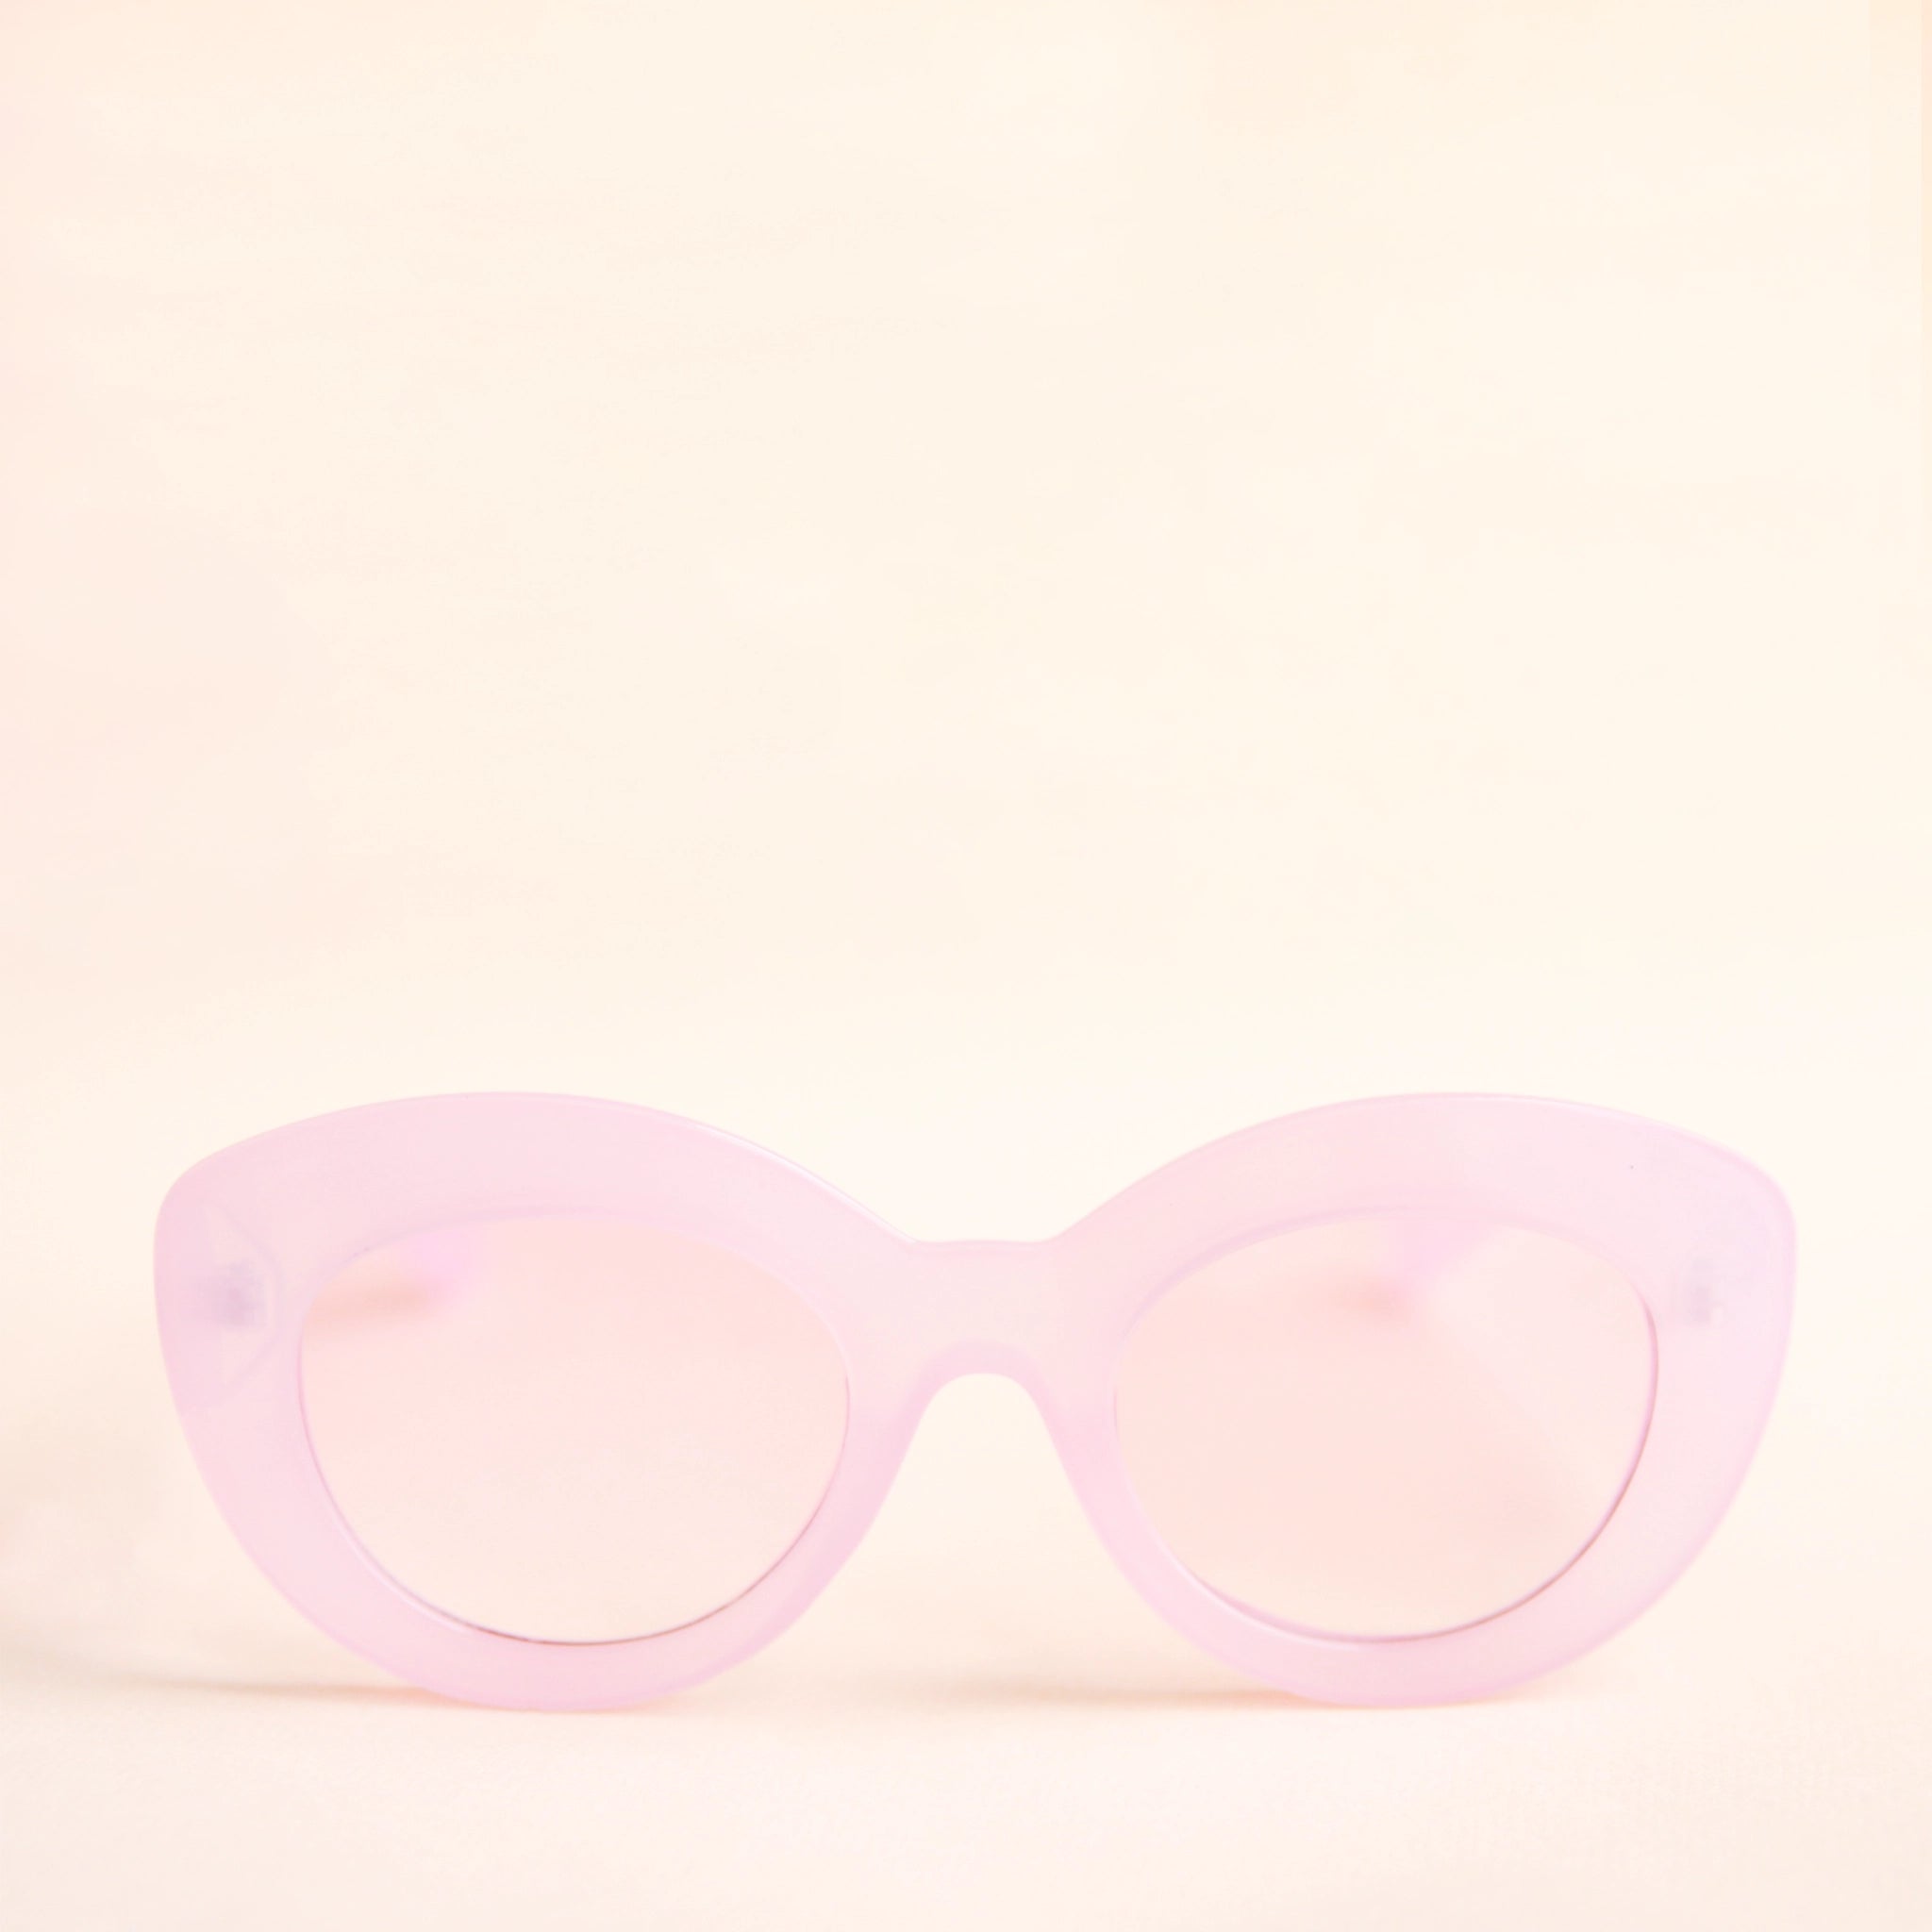 On a neutral background is the Gemma Sunglasses in the shade Amethyst. They have a rounded shape with a slight cateye flair at the corners. The frame material is a durable amber / peachy colored plastic and the lenses are a similar tone.